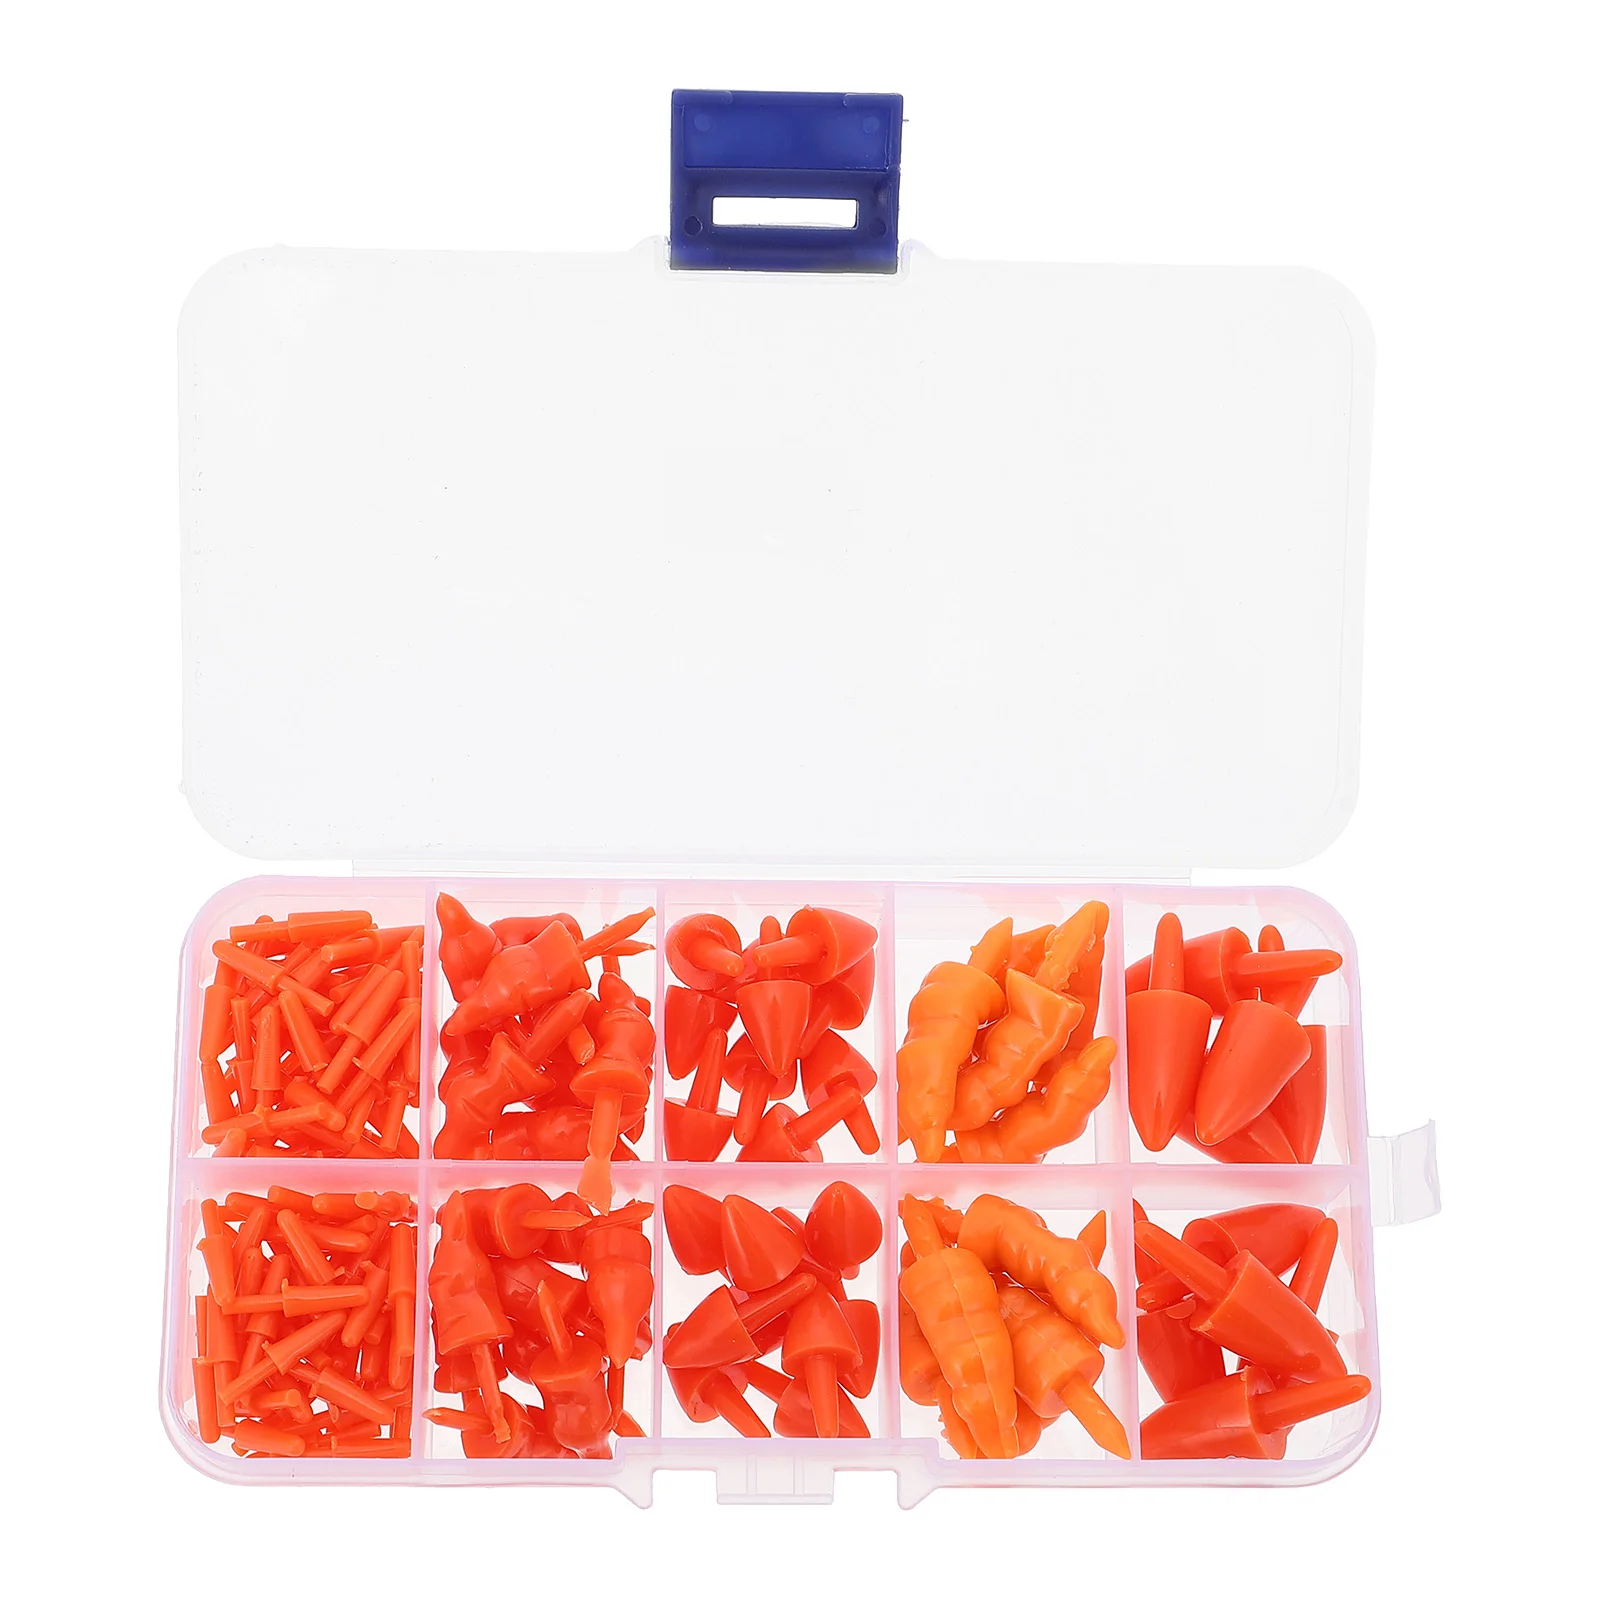 Red Nose Red Nose Christmas Crafts 160pcs Snowman Nose Carrots Craft Plastic for Toy Making for Diy Craft Making